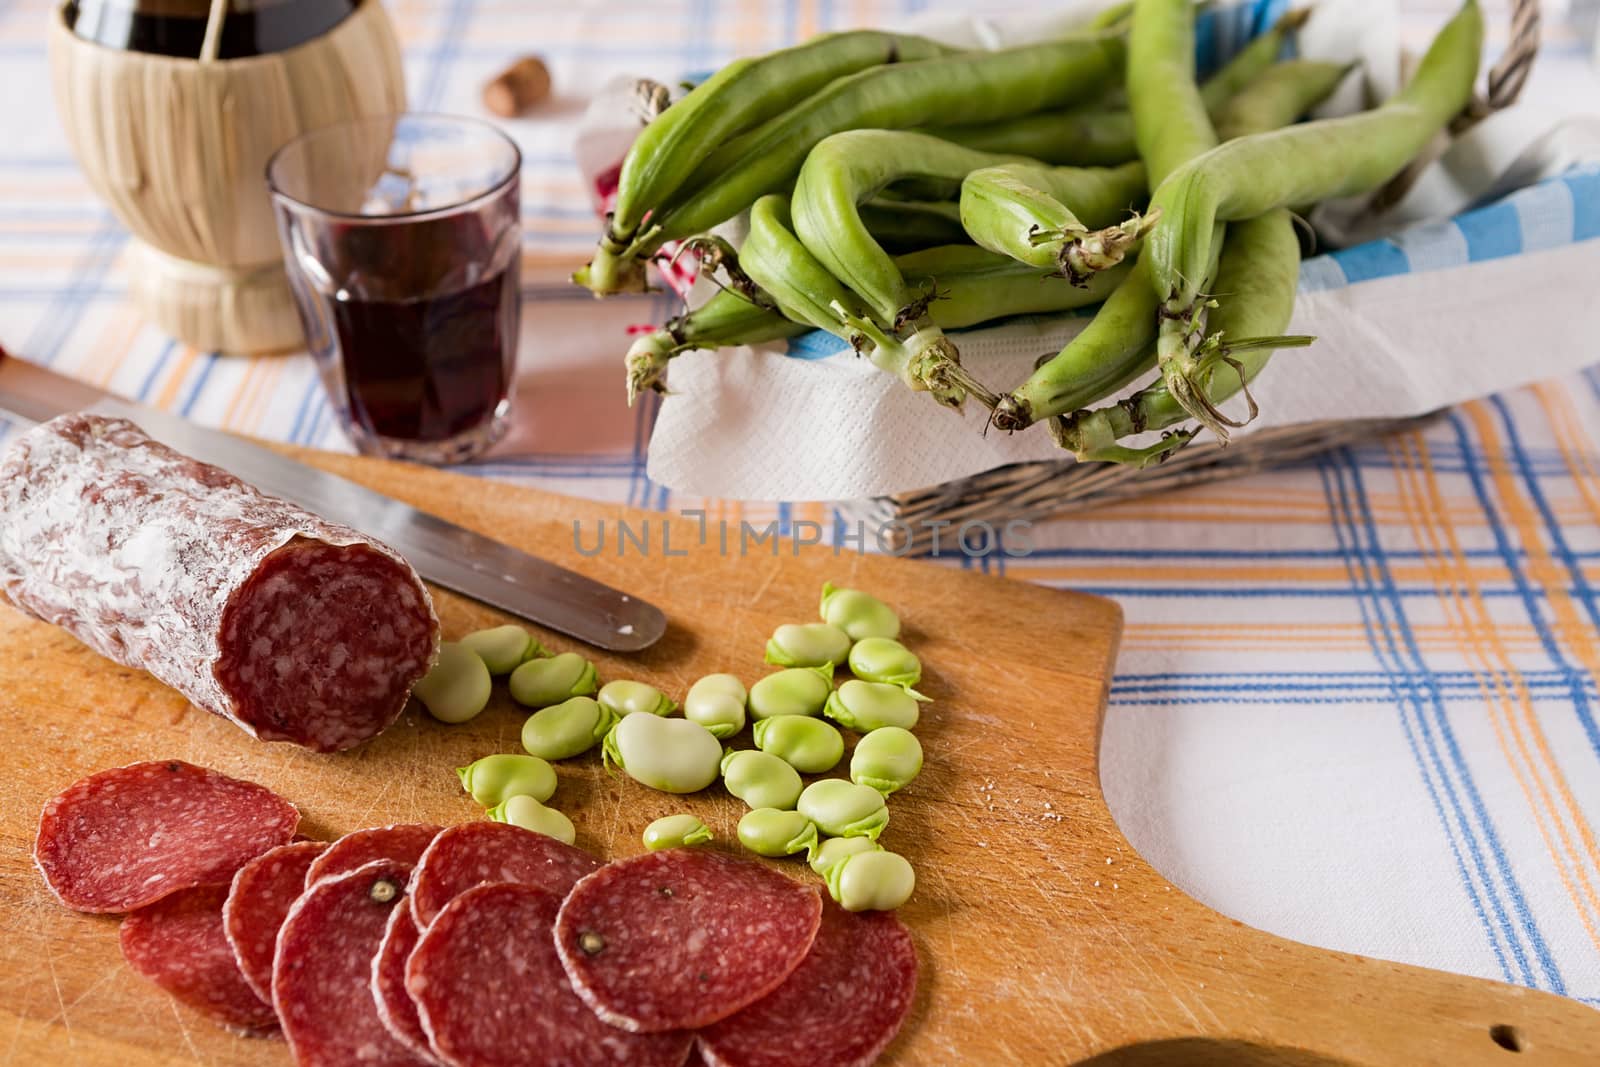 Chopping board with salami broad bean and a glass of red wine